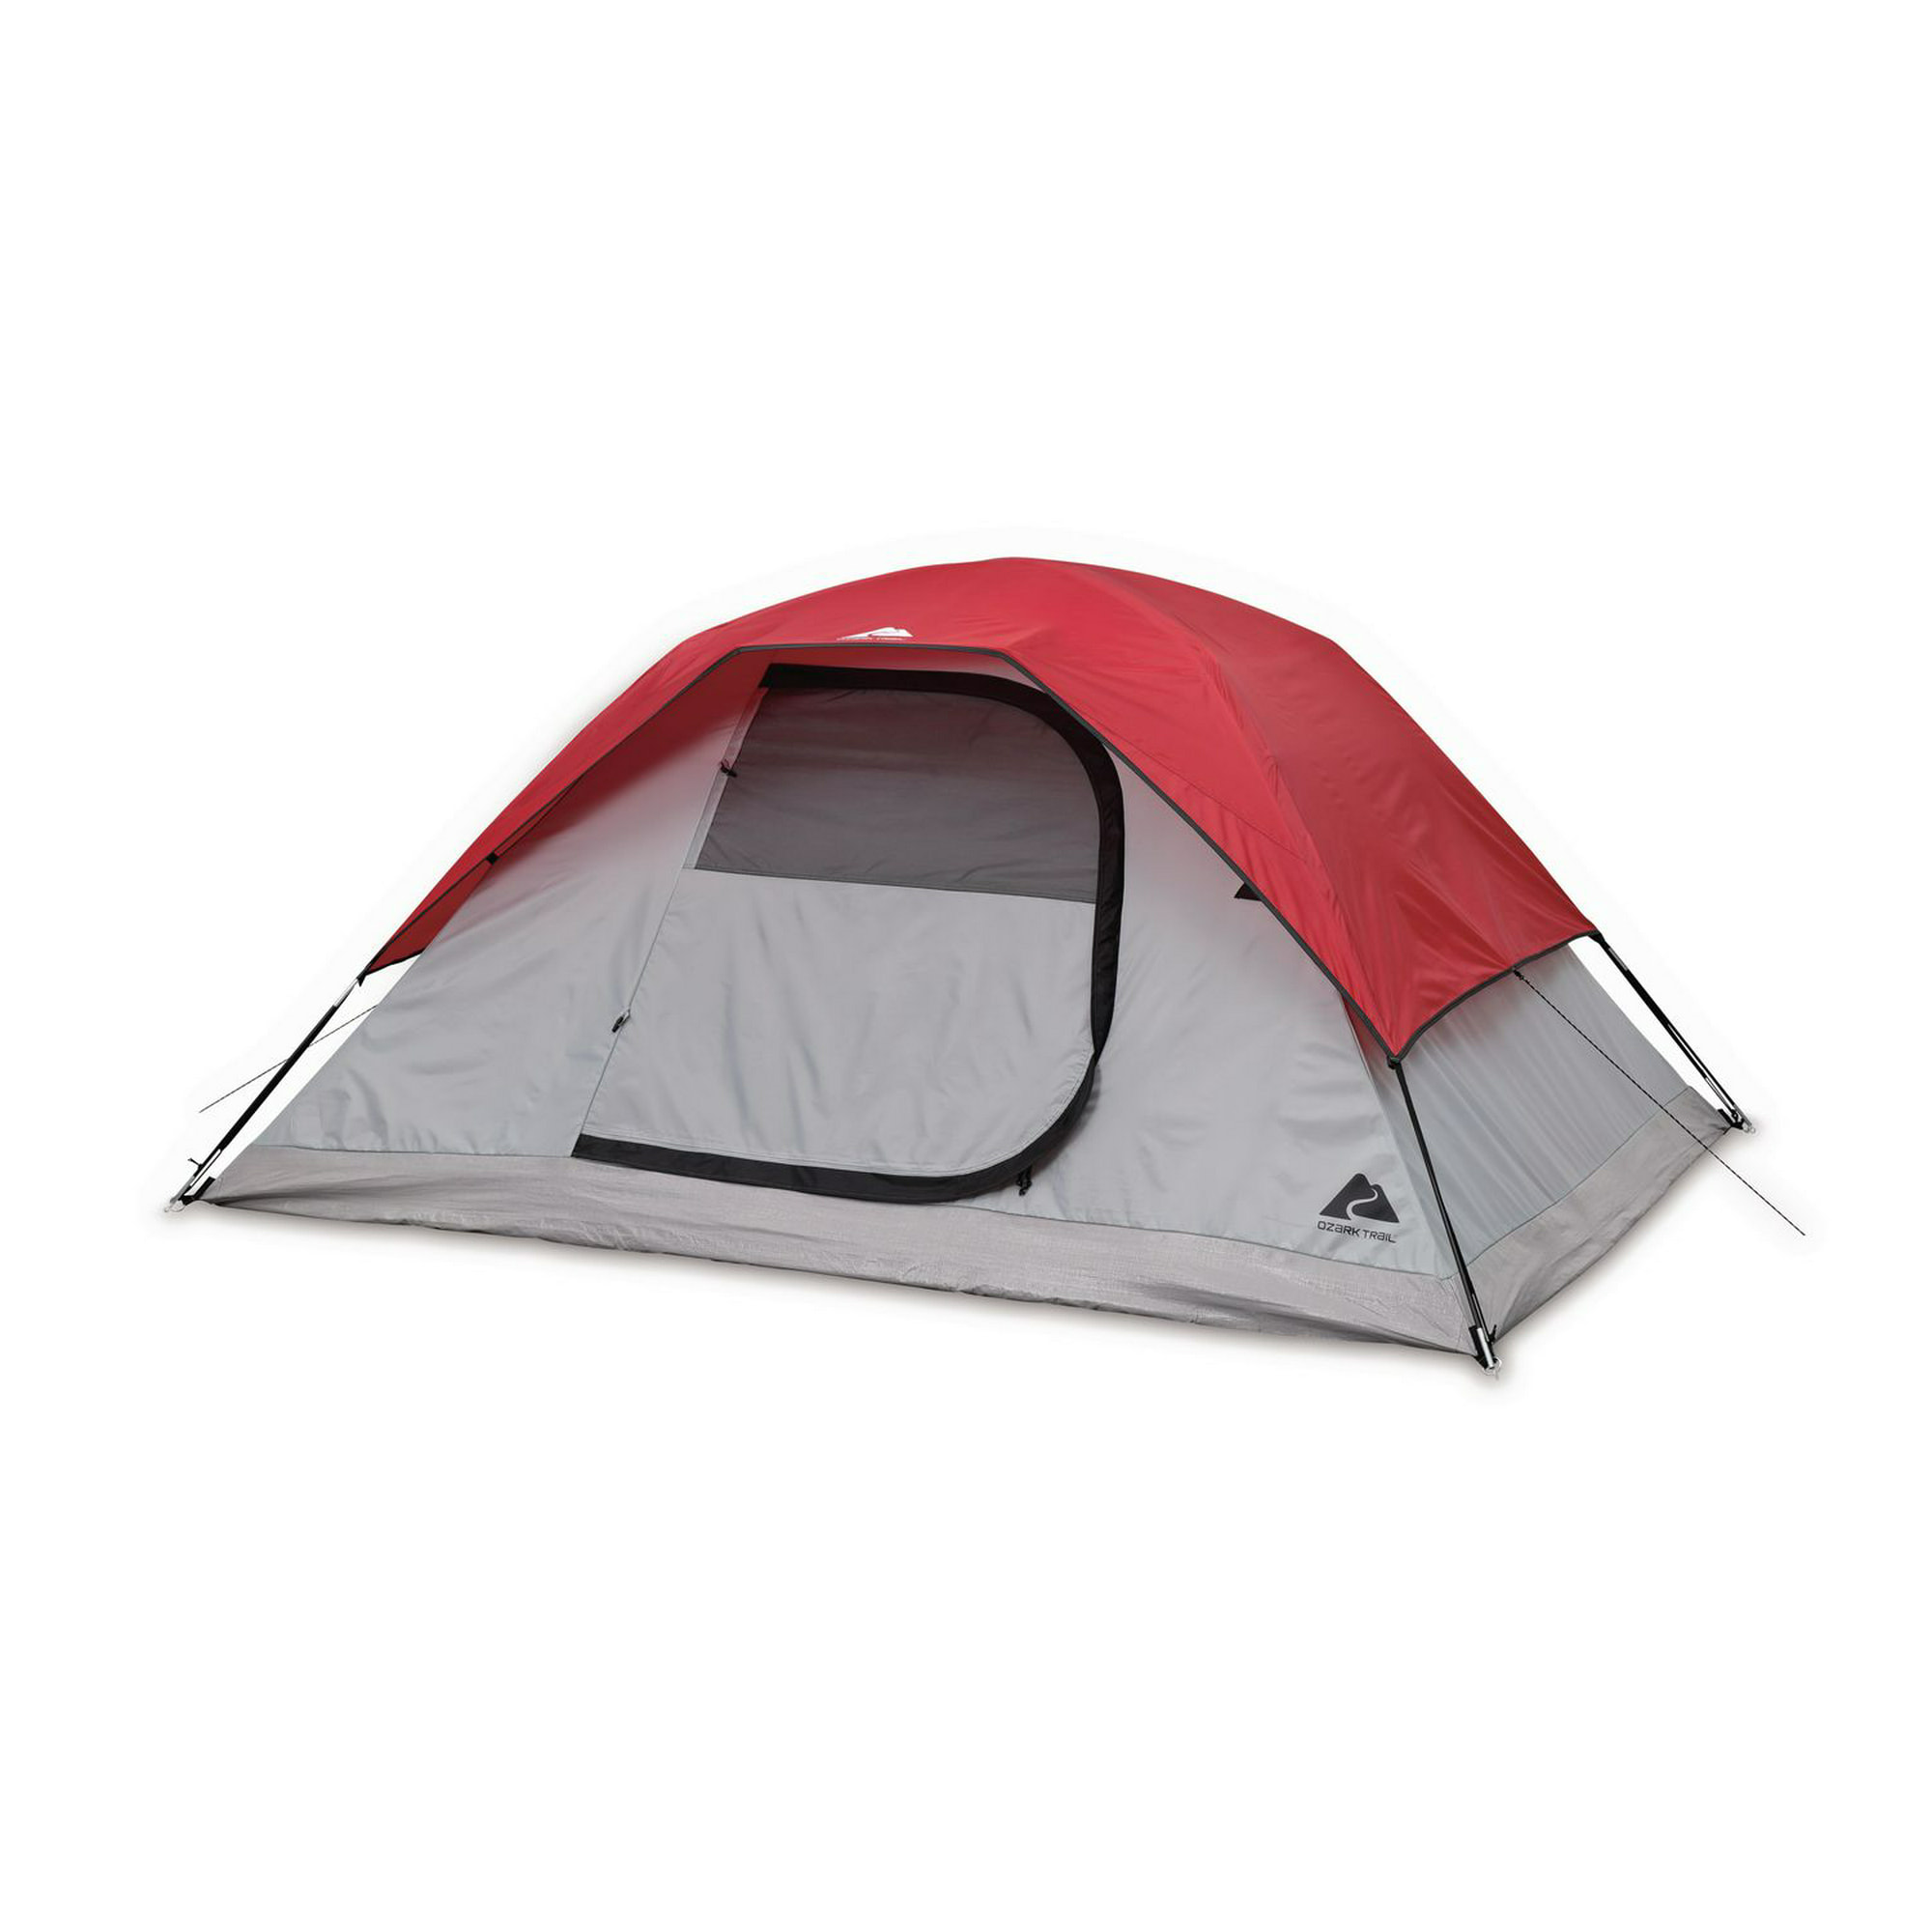 Ozark Trail 8-Person Dome Tent, 16ft L x8ft W x72in H 